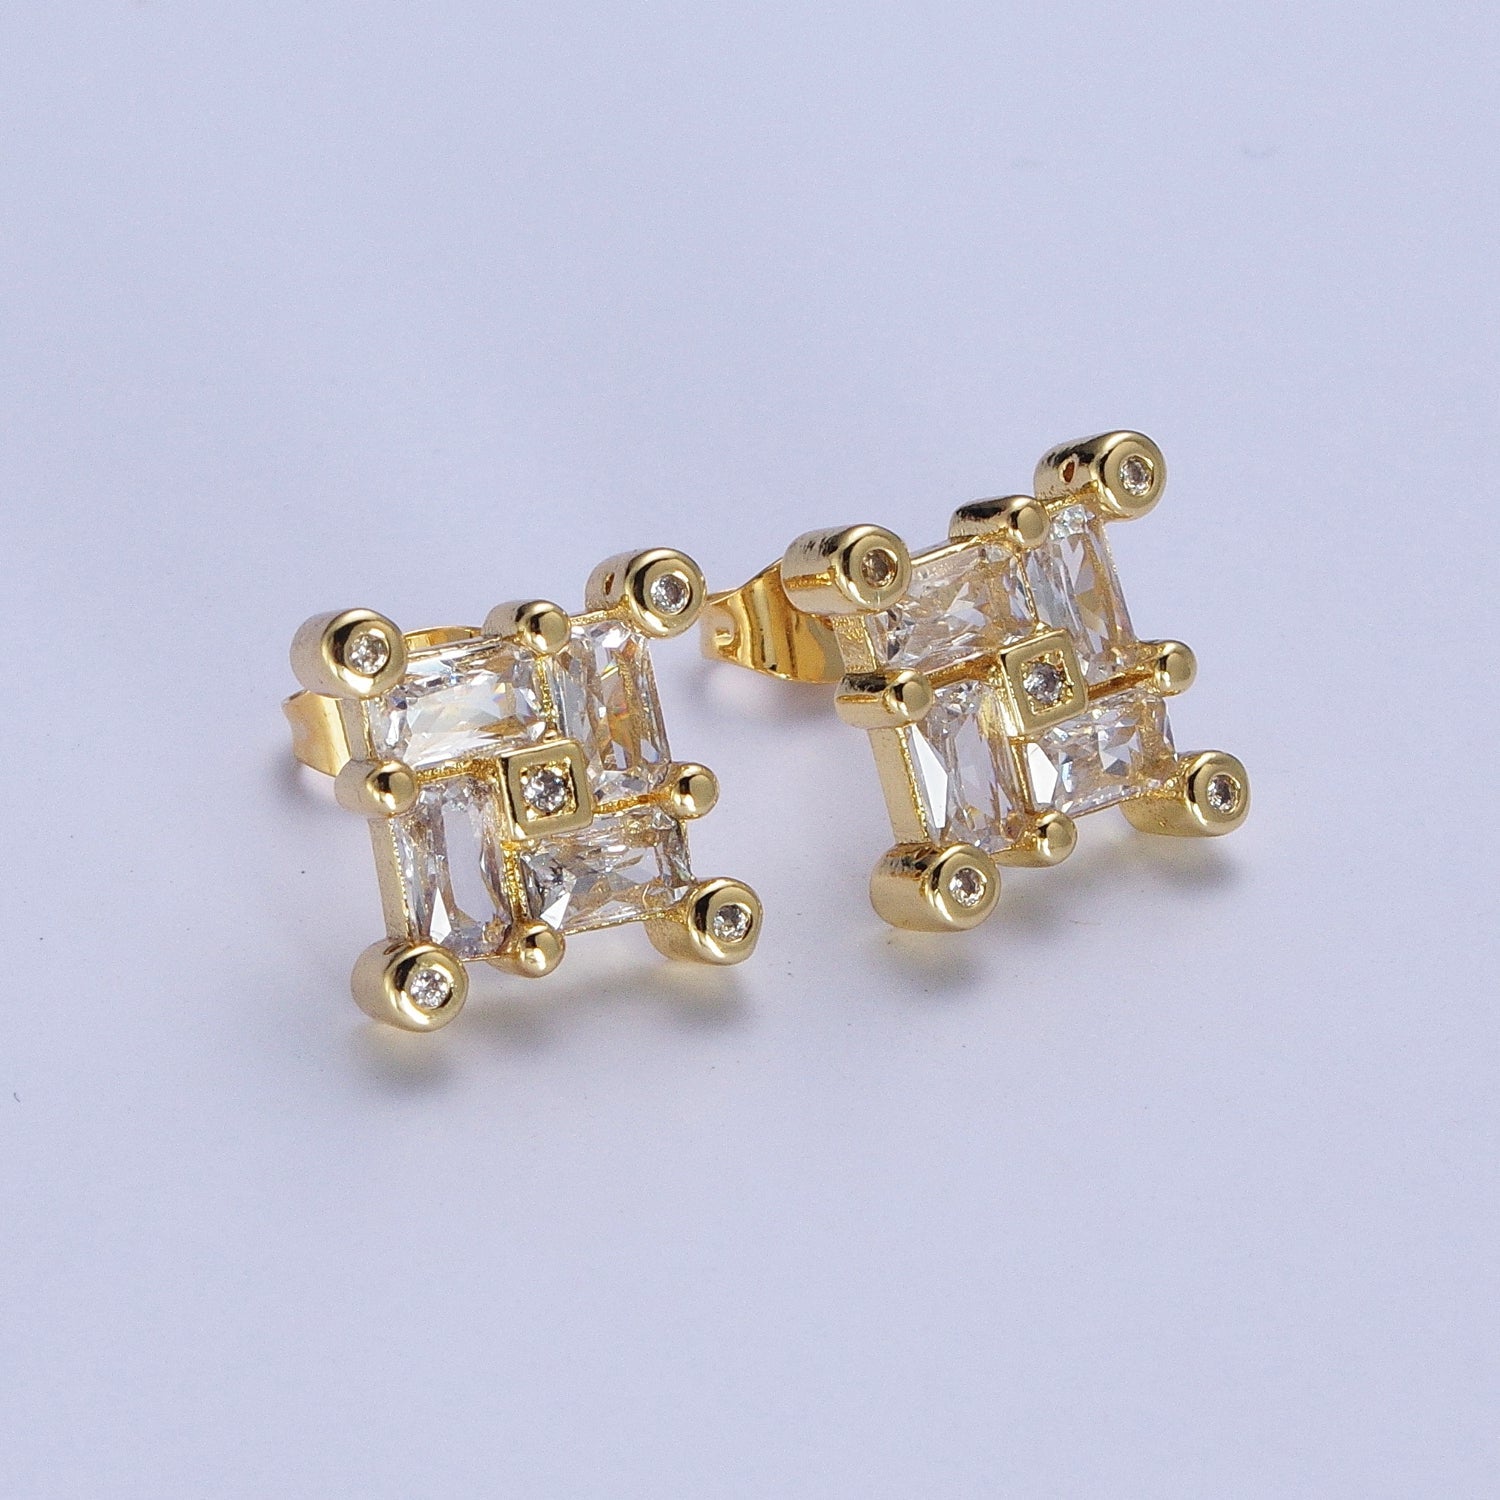 24K Gold Filled Micro Pave CZ Stud Earrings Baguette Colorful Cubic Zirconia Earrings Q051 - DLUXCA